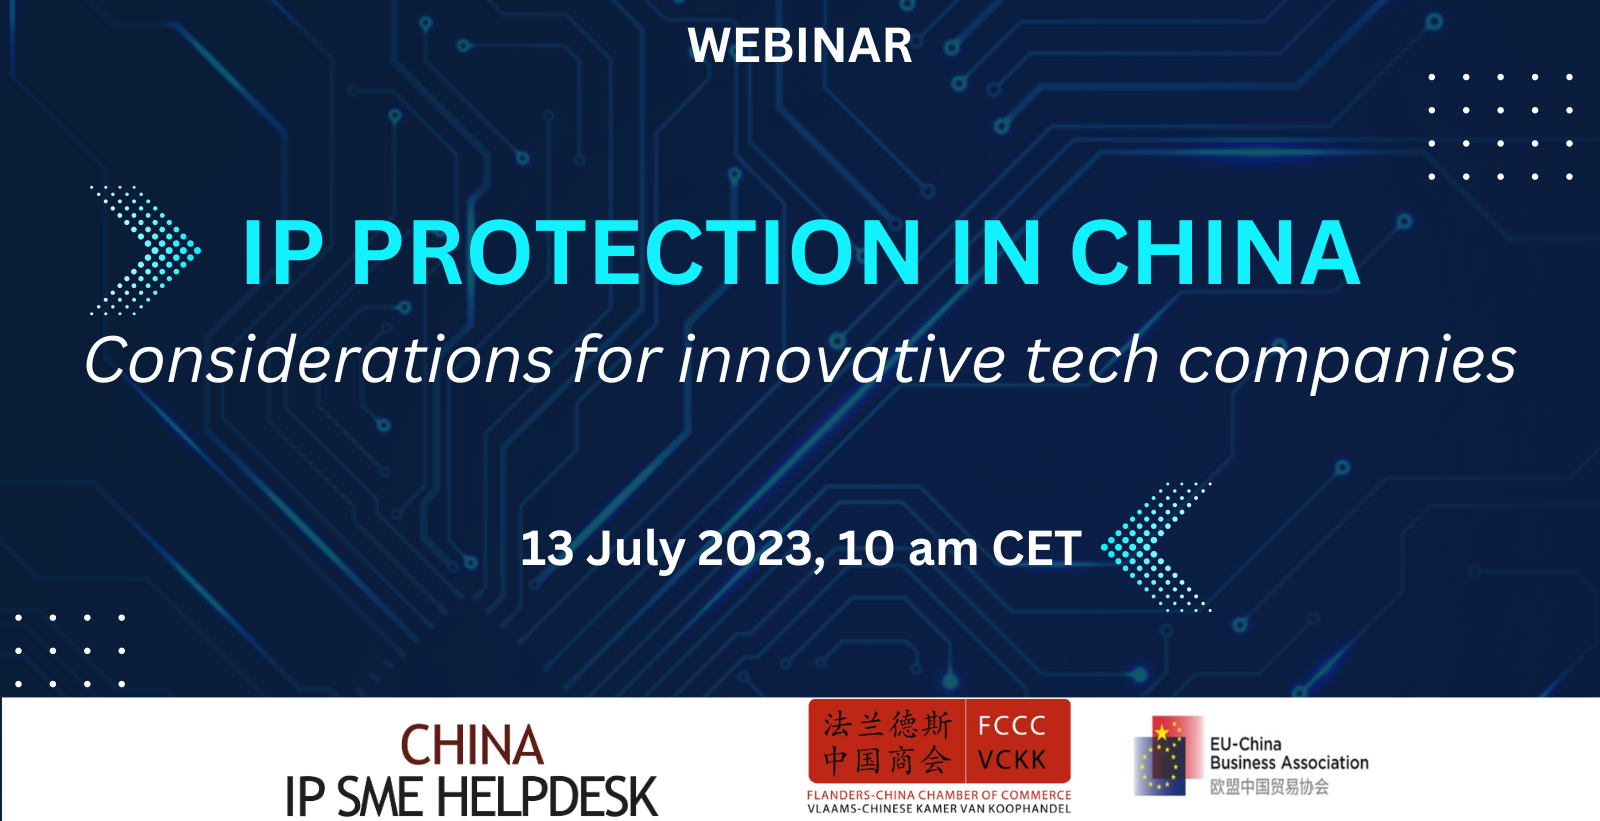 Webinar: IP Protection in China: Considerations for innovative tech companies - 13 July 2023 - 10h00 CEST